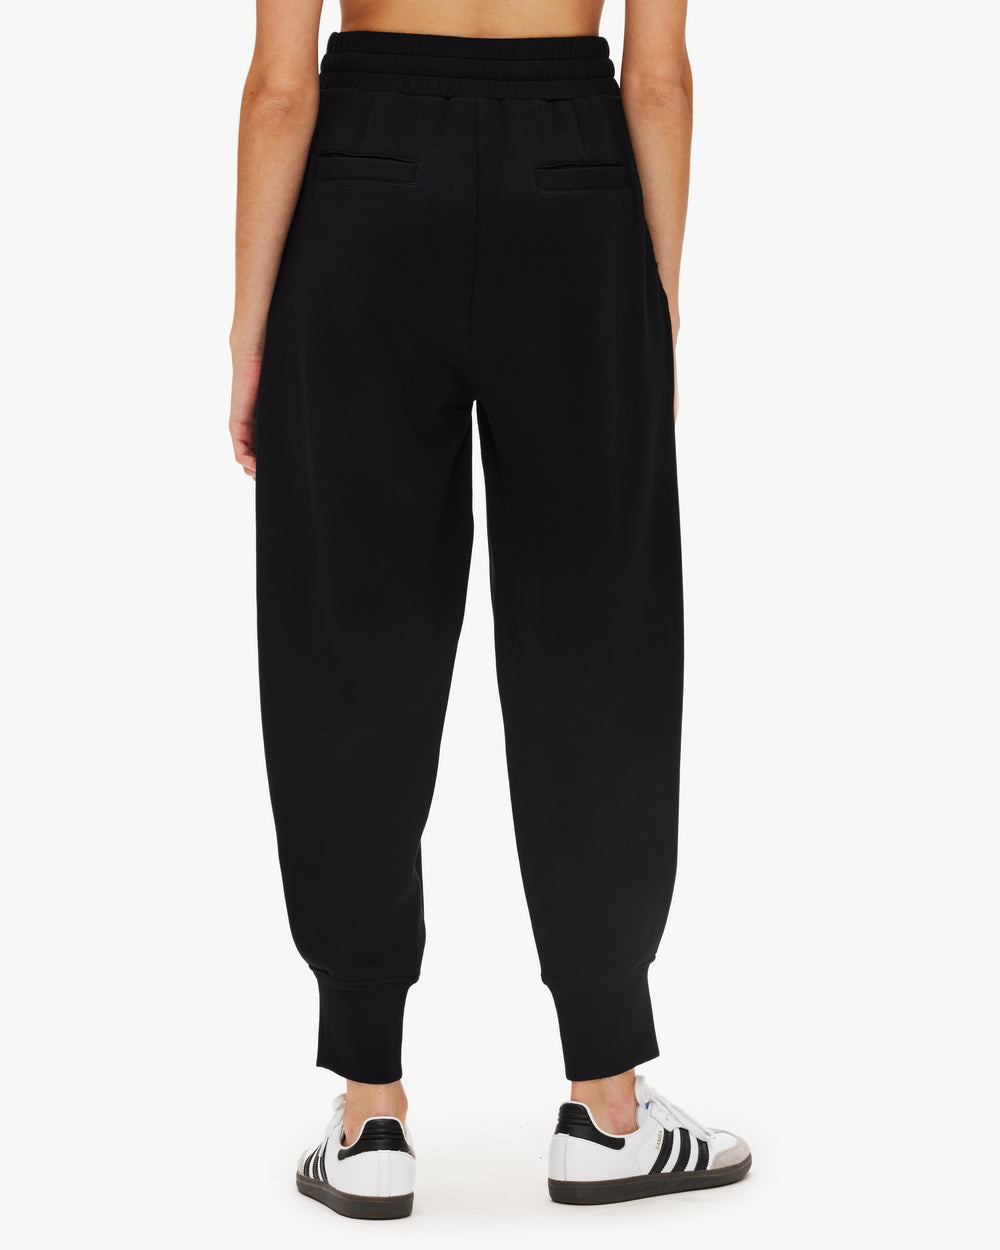 Varley The Relaxed Pant 27.5